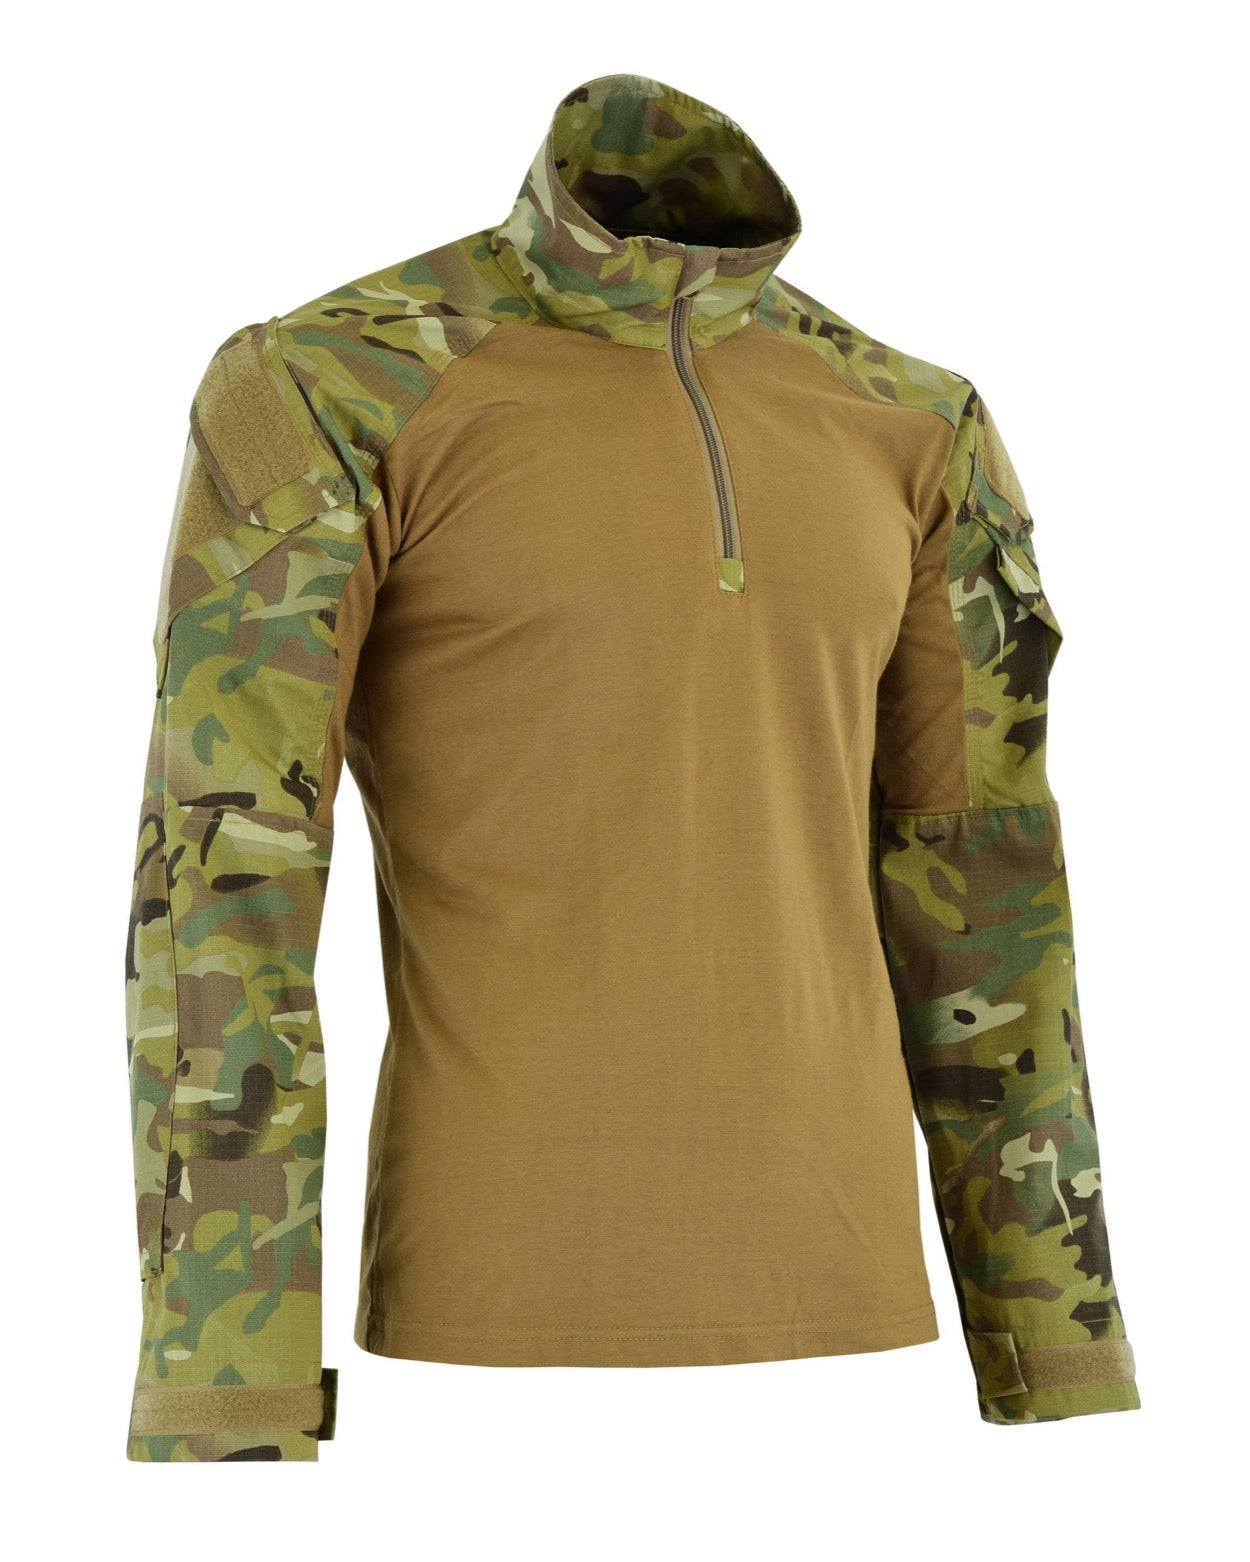 Tactical Zone HYBRID TACTICAL SHIRT IS A PERFECT COMBAT SHIRT Colour UTP Side